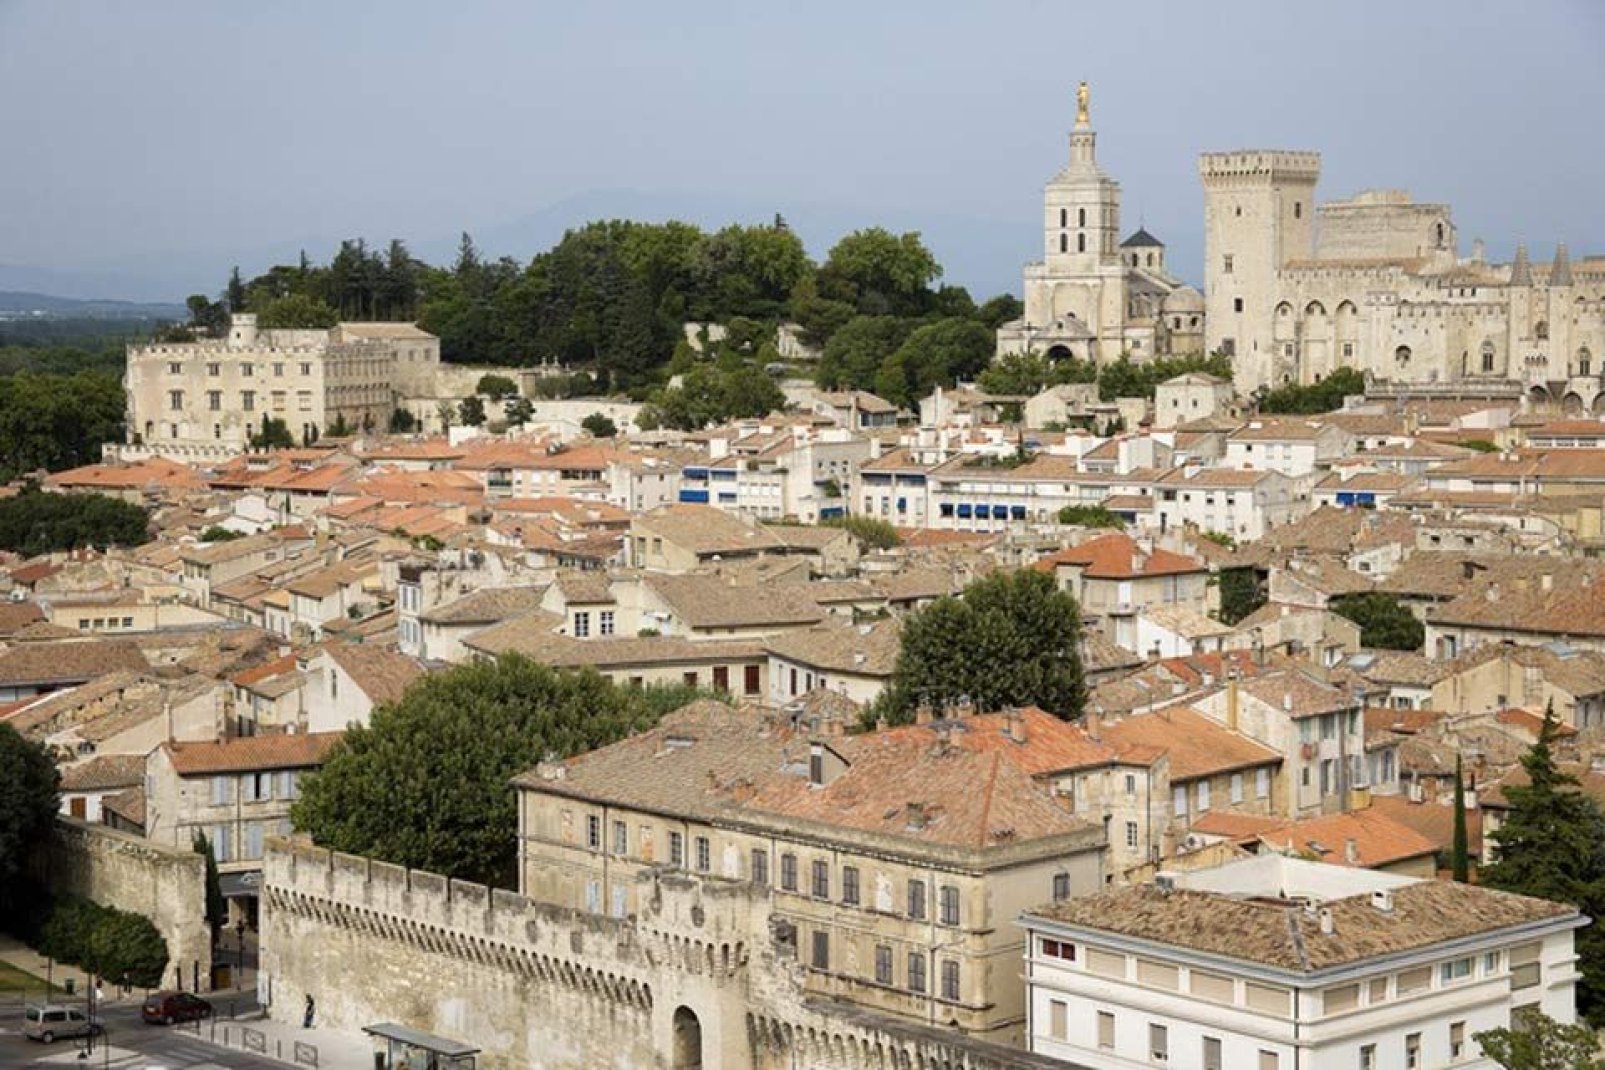 Avignon has managed to preserve a number of relics from its Papacy period, most notably its fortification walls and its historic centre, which have earned it its status as a UNESCO World Heritage Site.